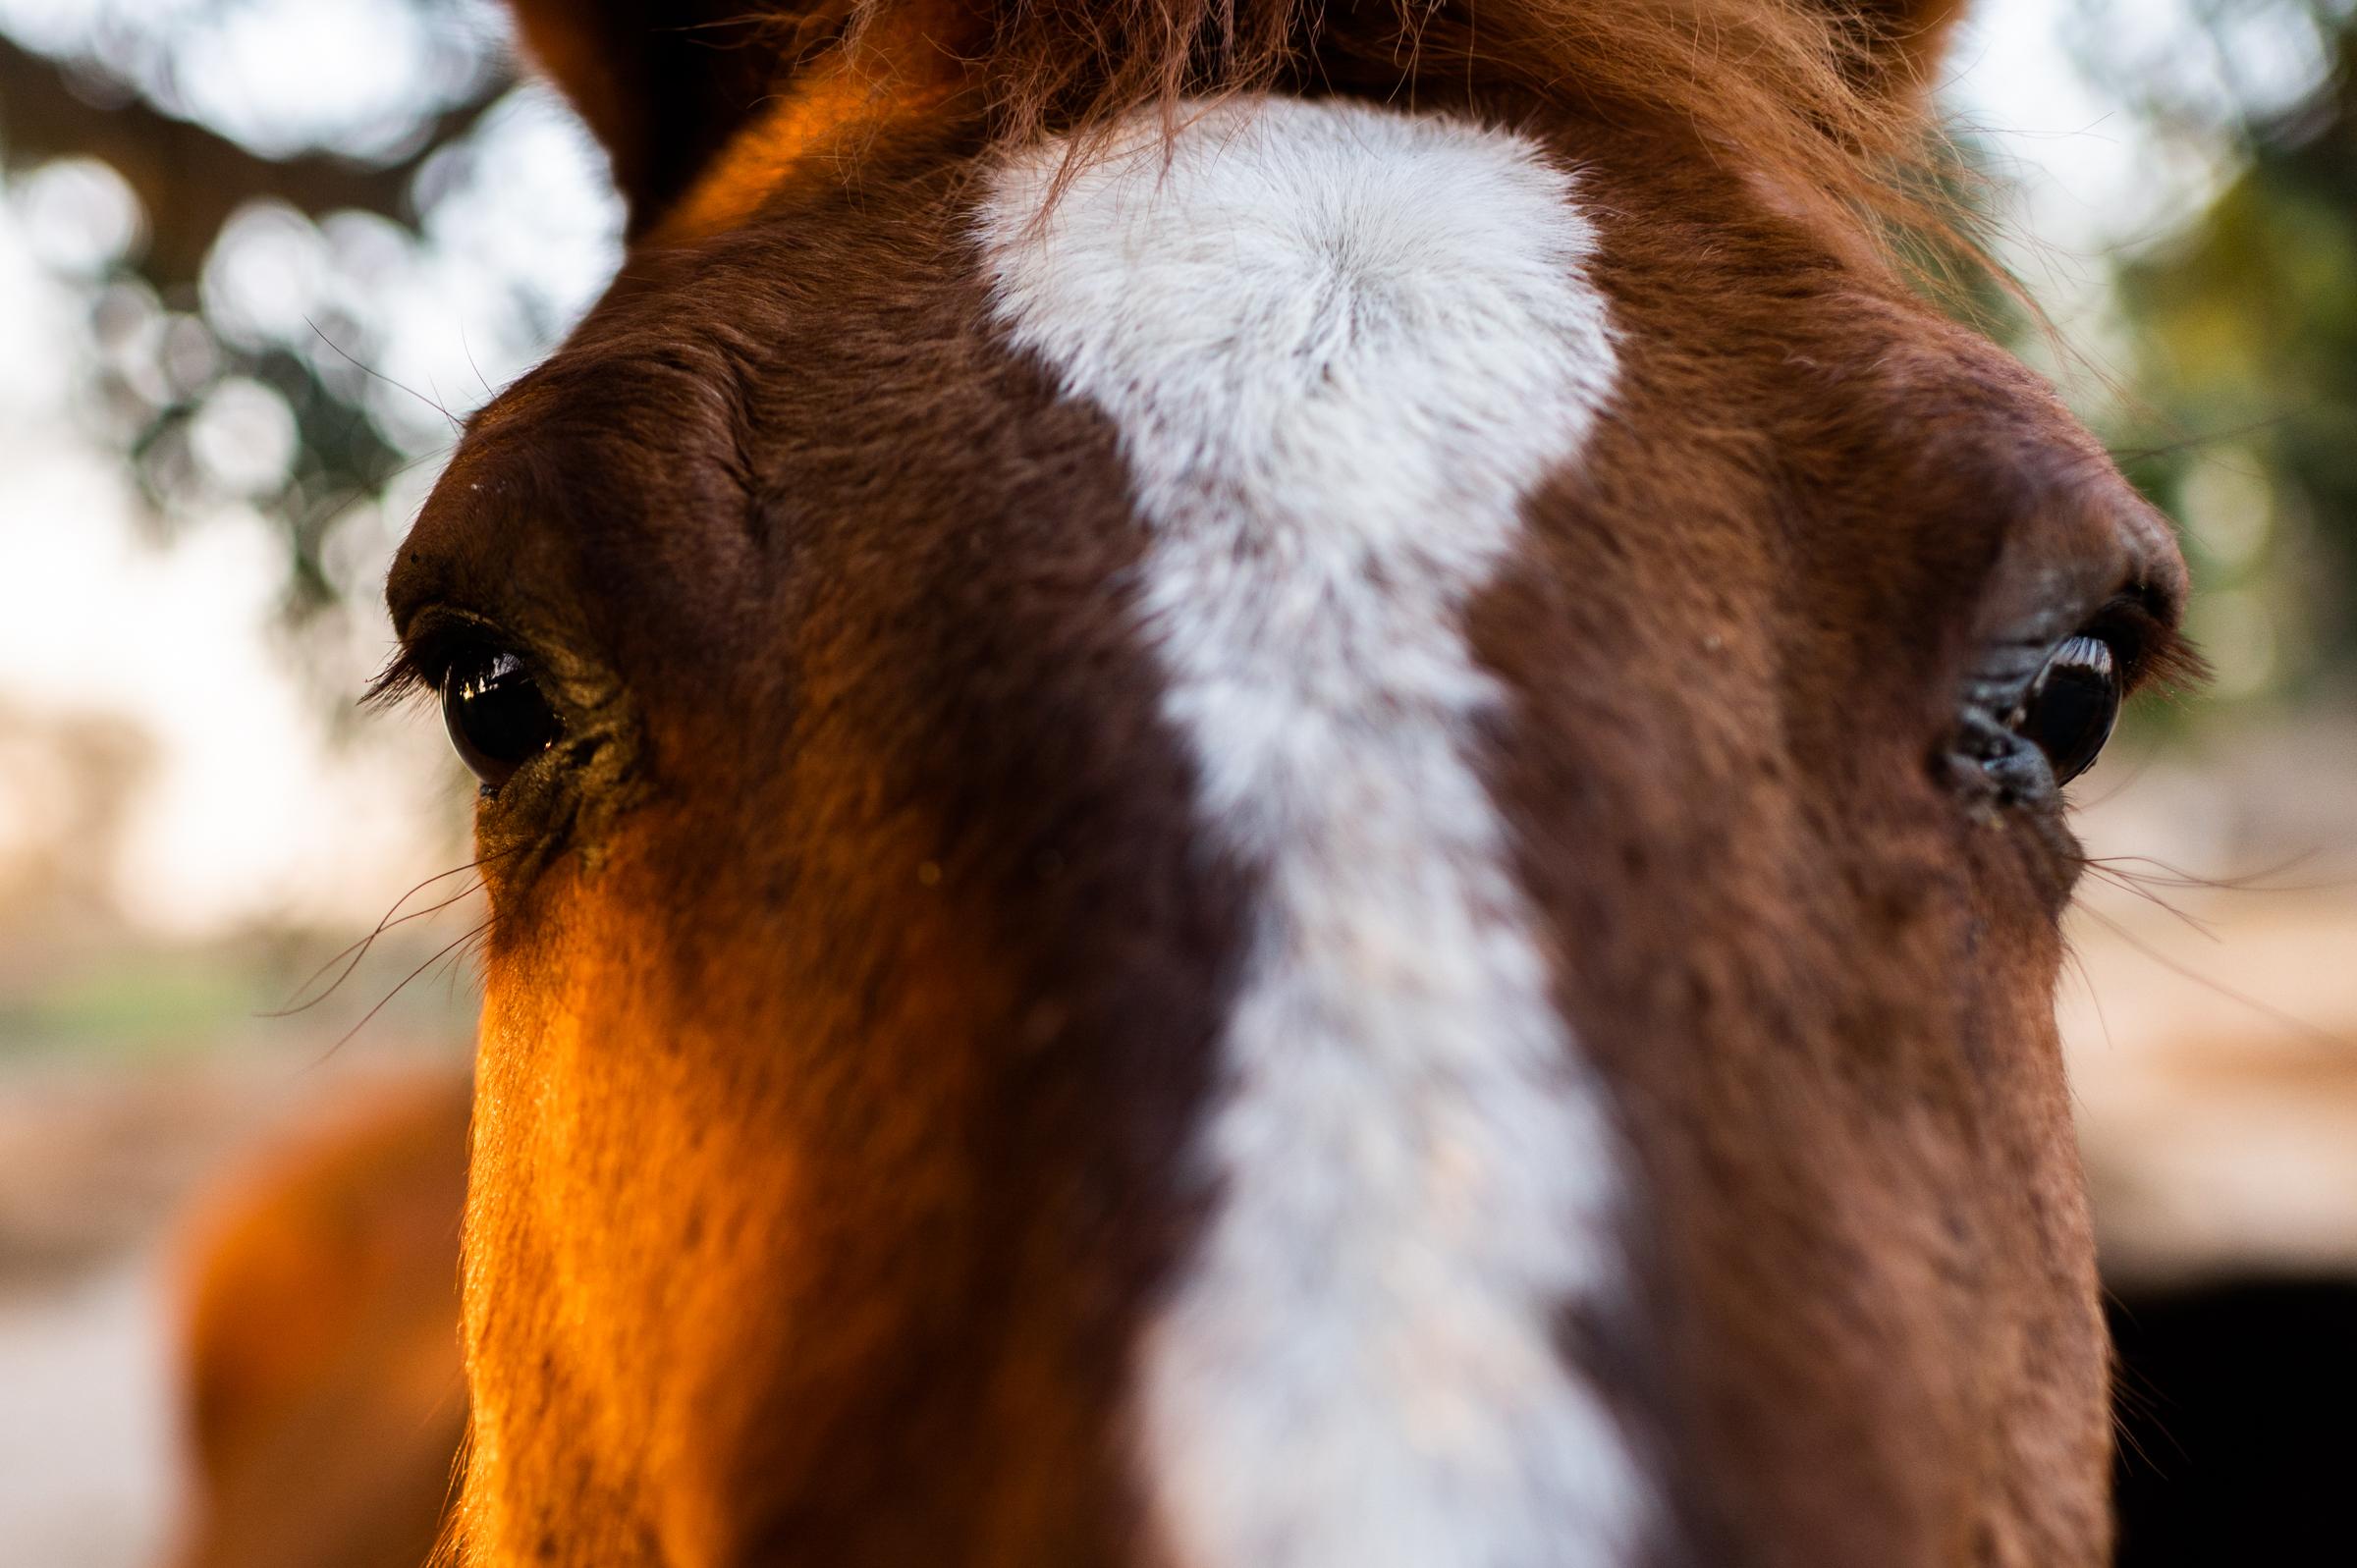 The eyes of a horse at Lonewillow Ranch, just outside of Firebaugh